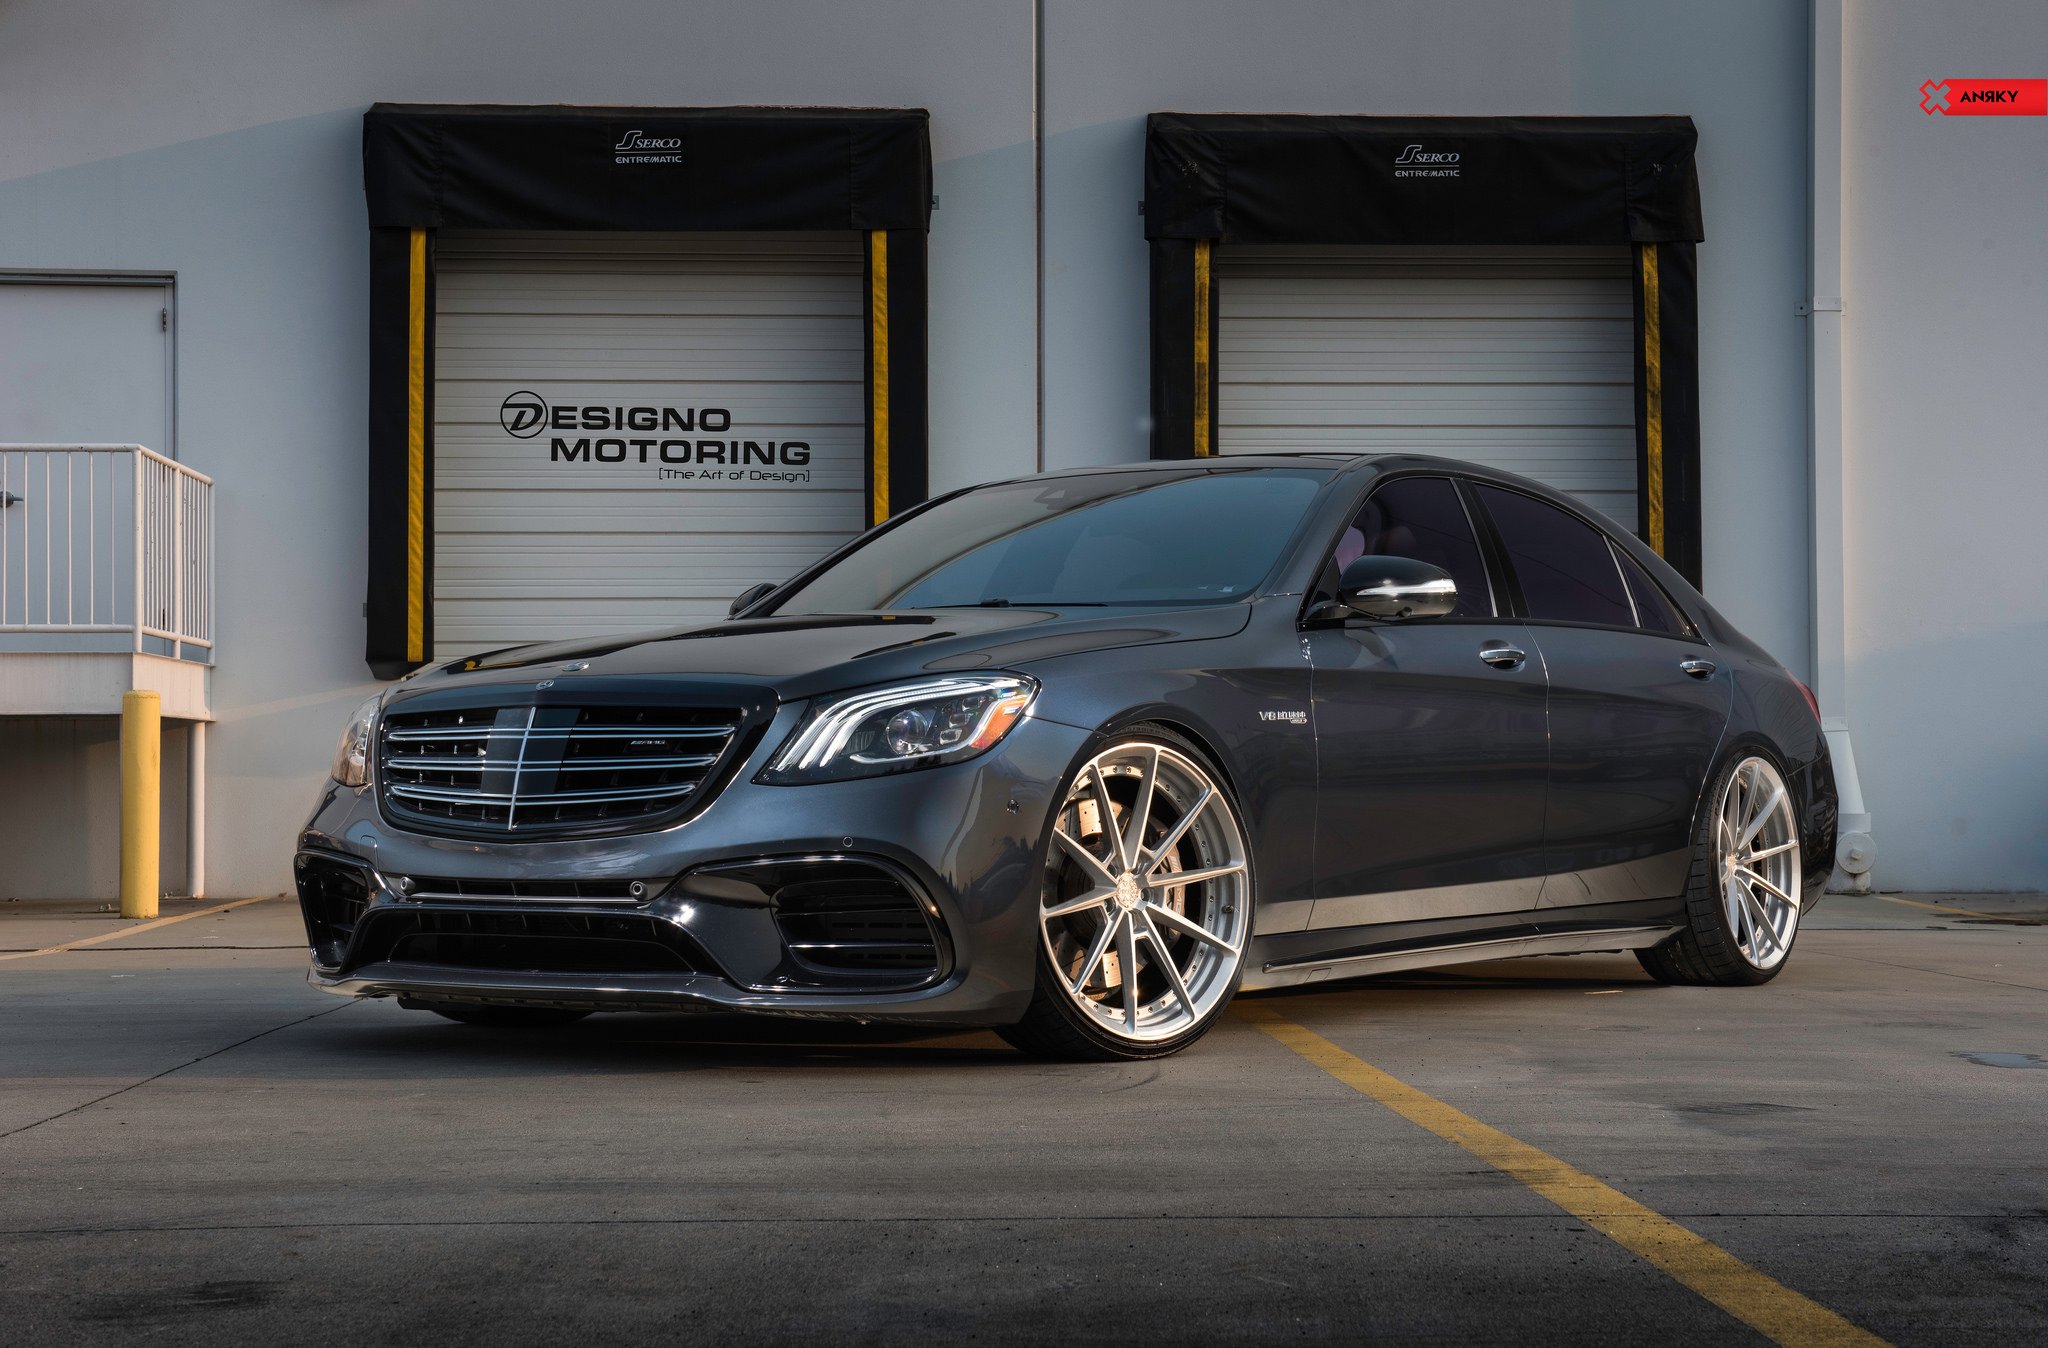 Custom Billet Grille on Black Mercedes S Class - Photo by Anrky Wheels